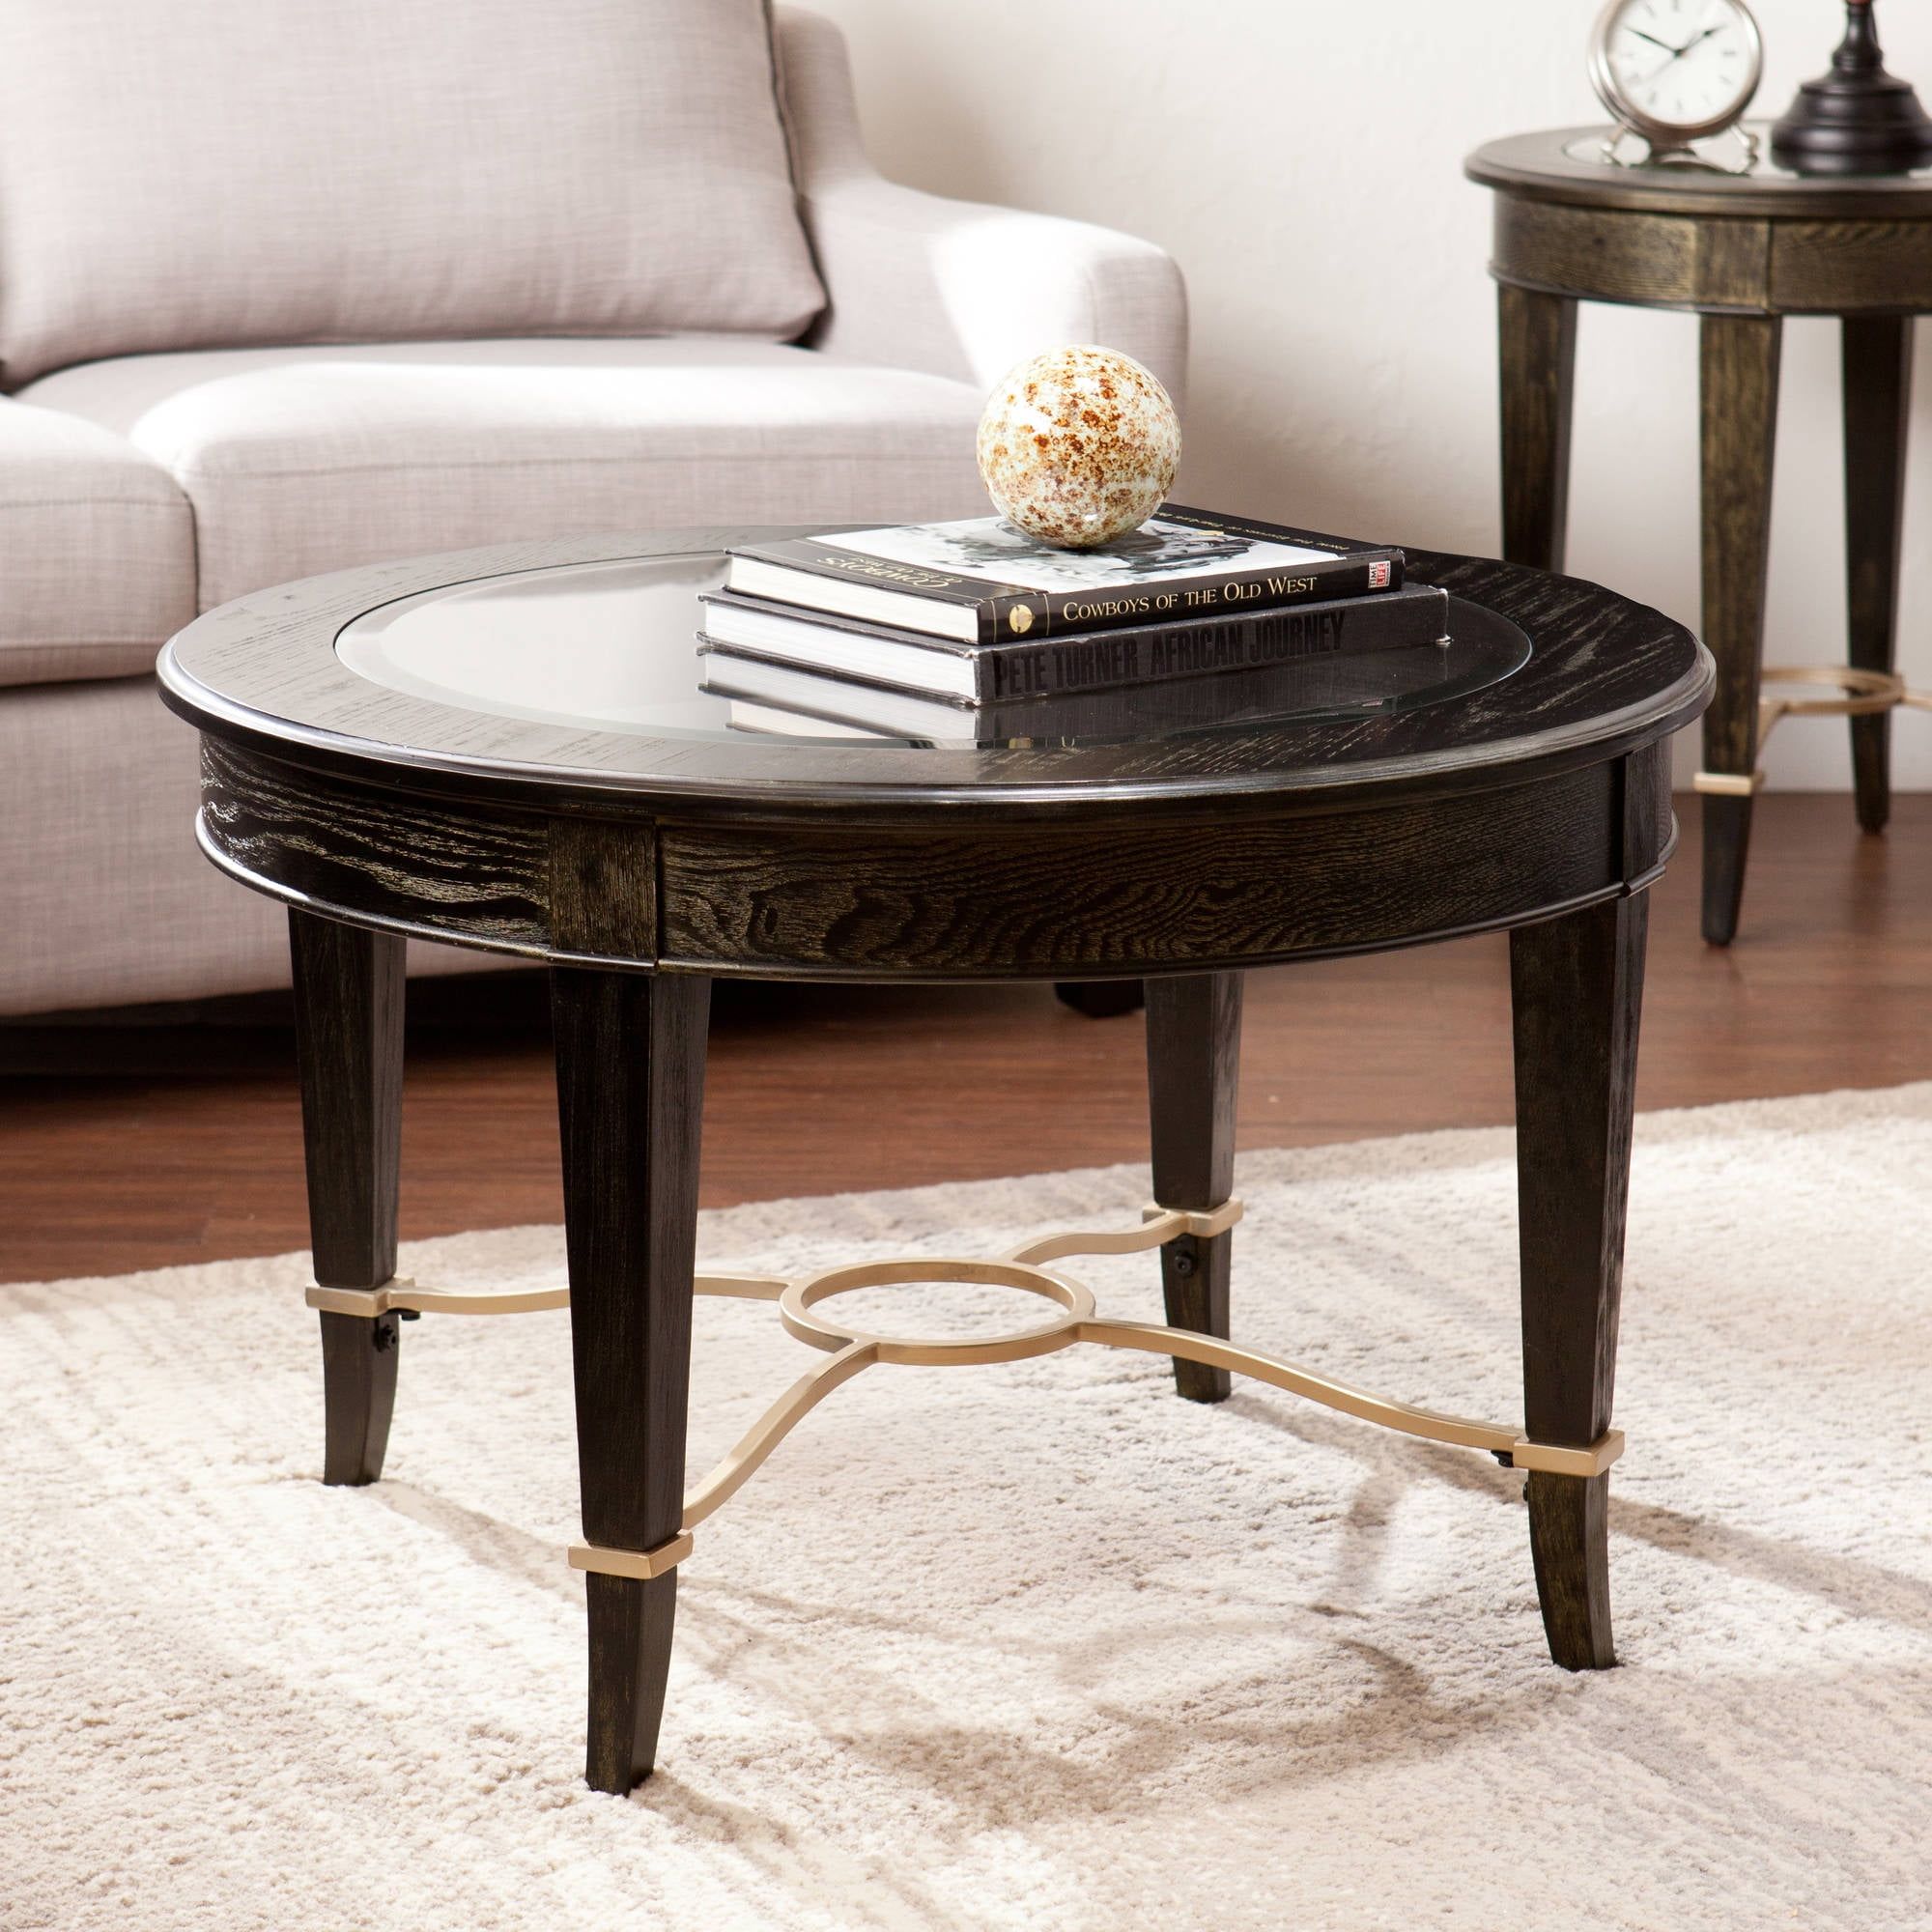 Southern Enterprises Regency Round Coffee Table, Black – Walmart Intended For Southern Enterprises Larksmill Coffee Tables (Gallery 5 of 20)